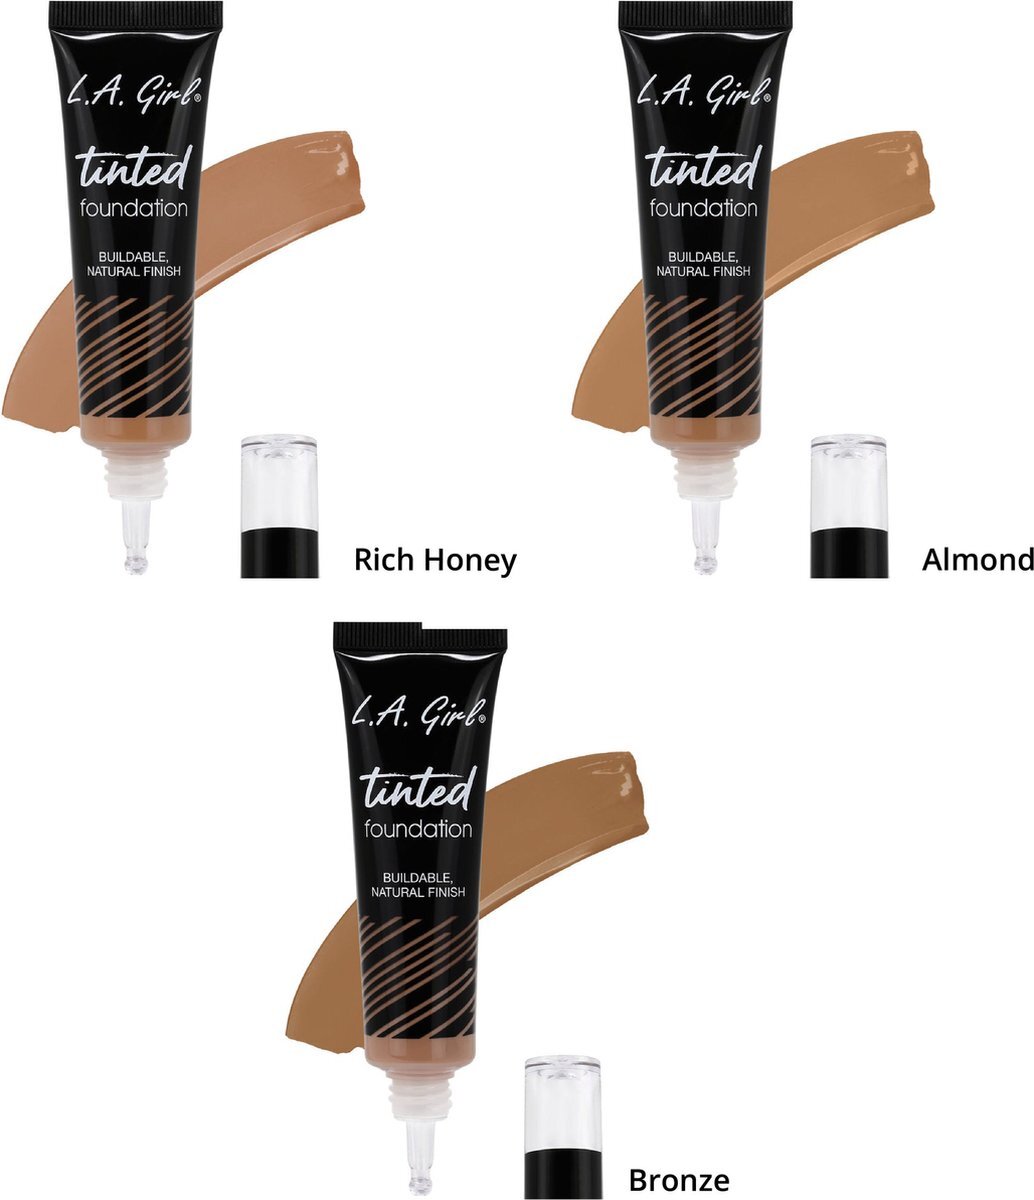 L.A. Girl - Tinted Foundation - Almond